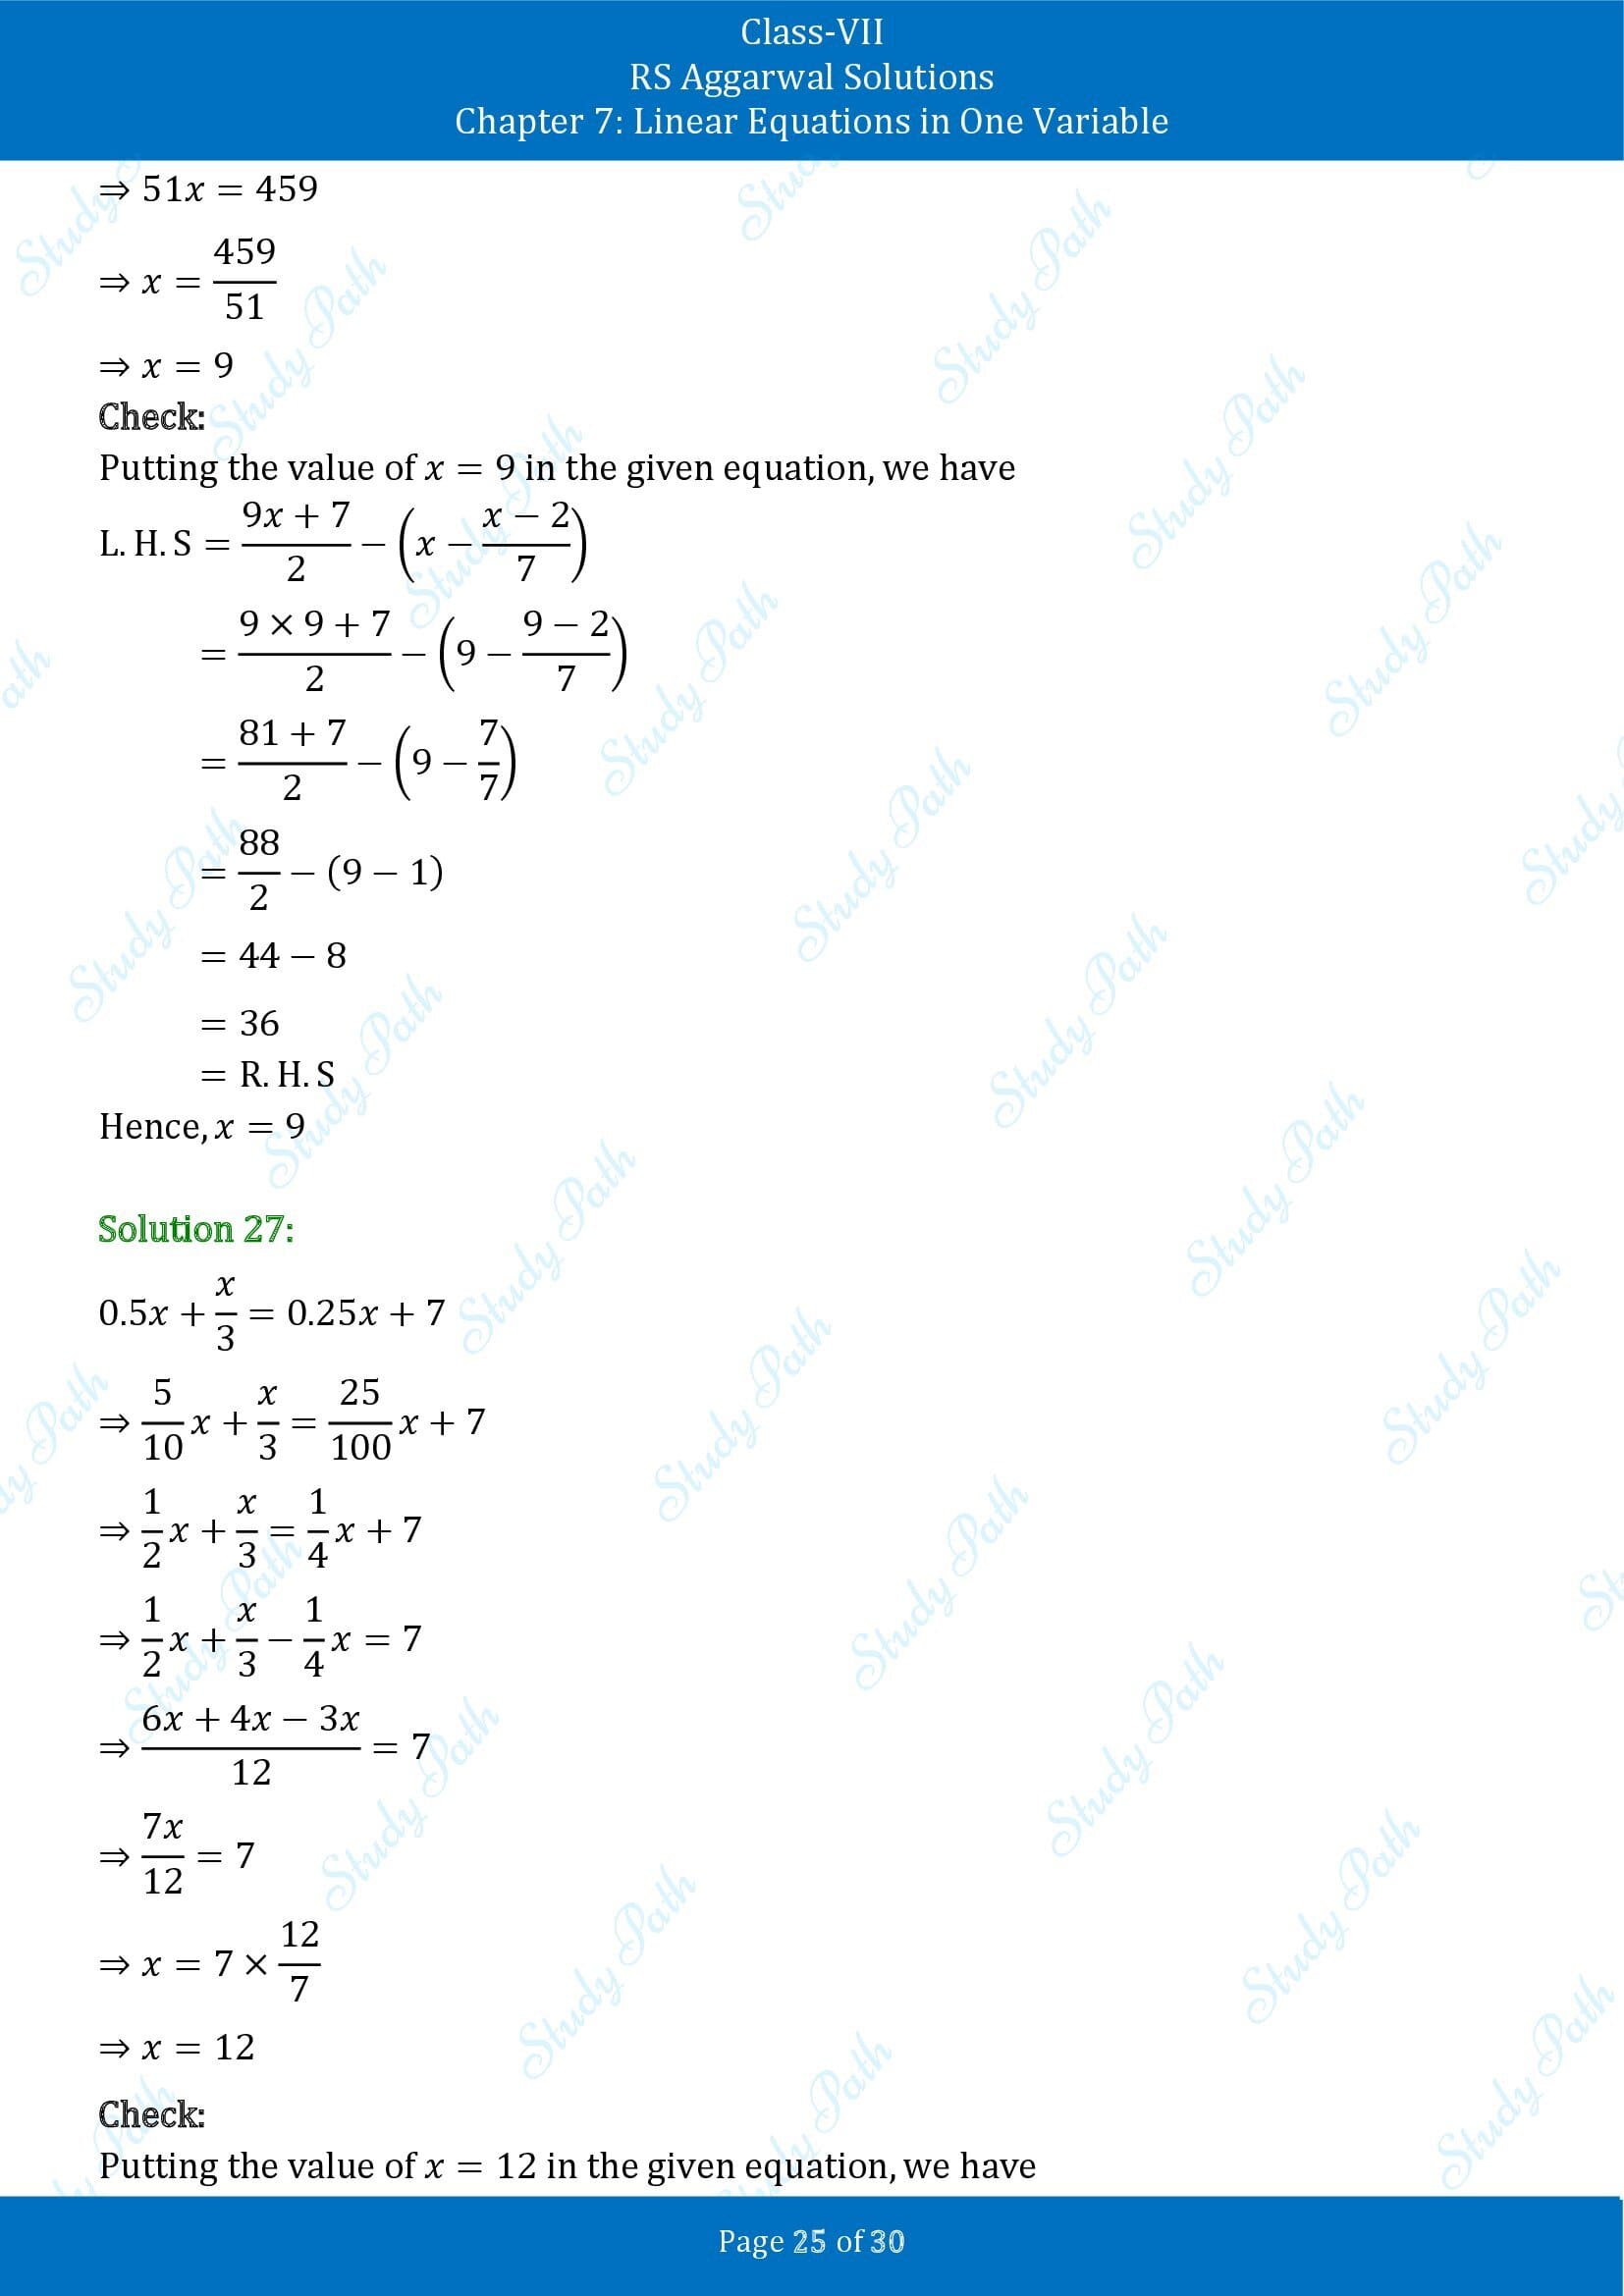 RS Aggarwal Solutions Class 7 Chapter 7 Linear Equations in One Variable Exercise 7A 00025